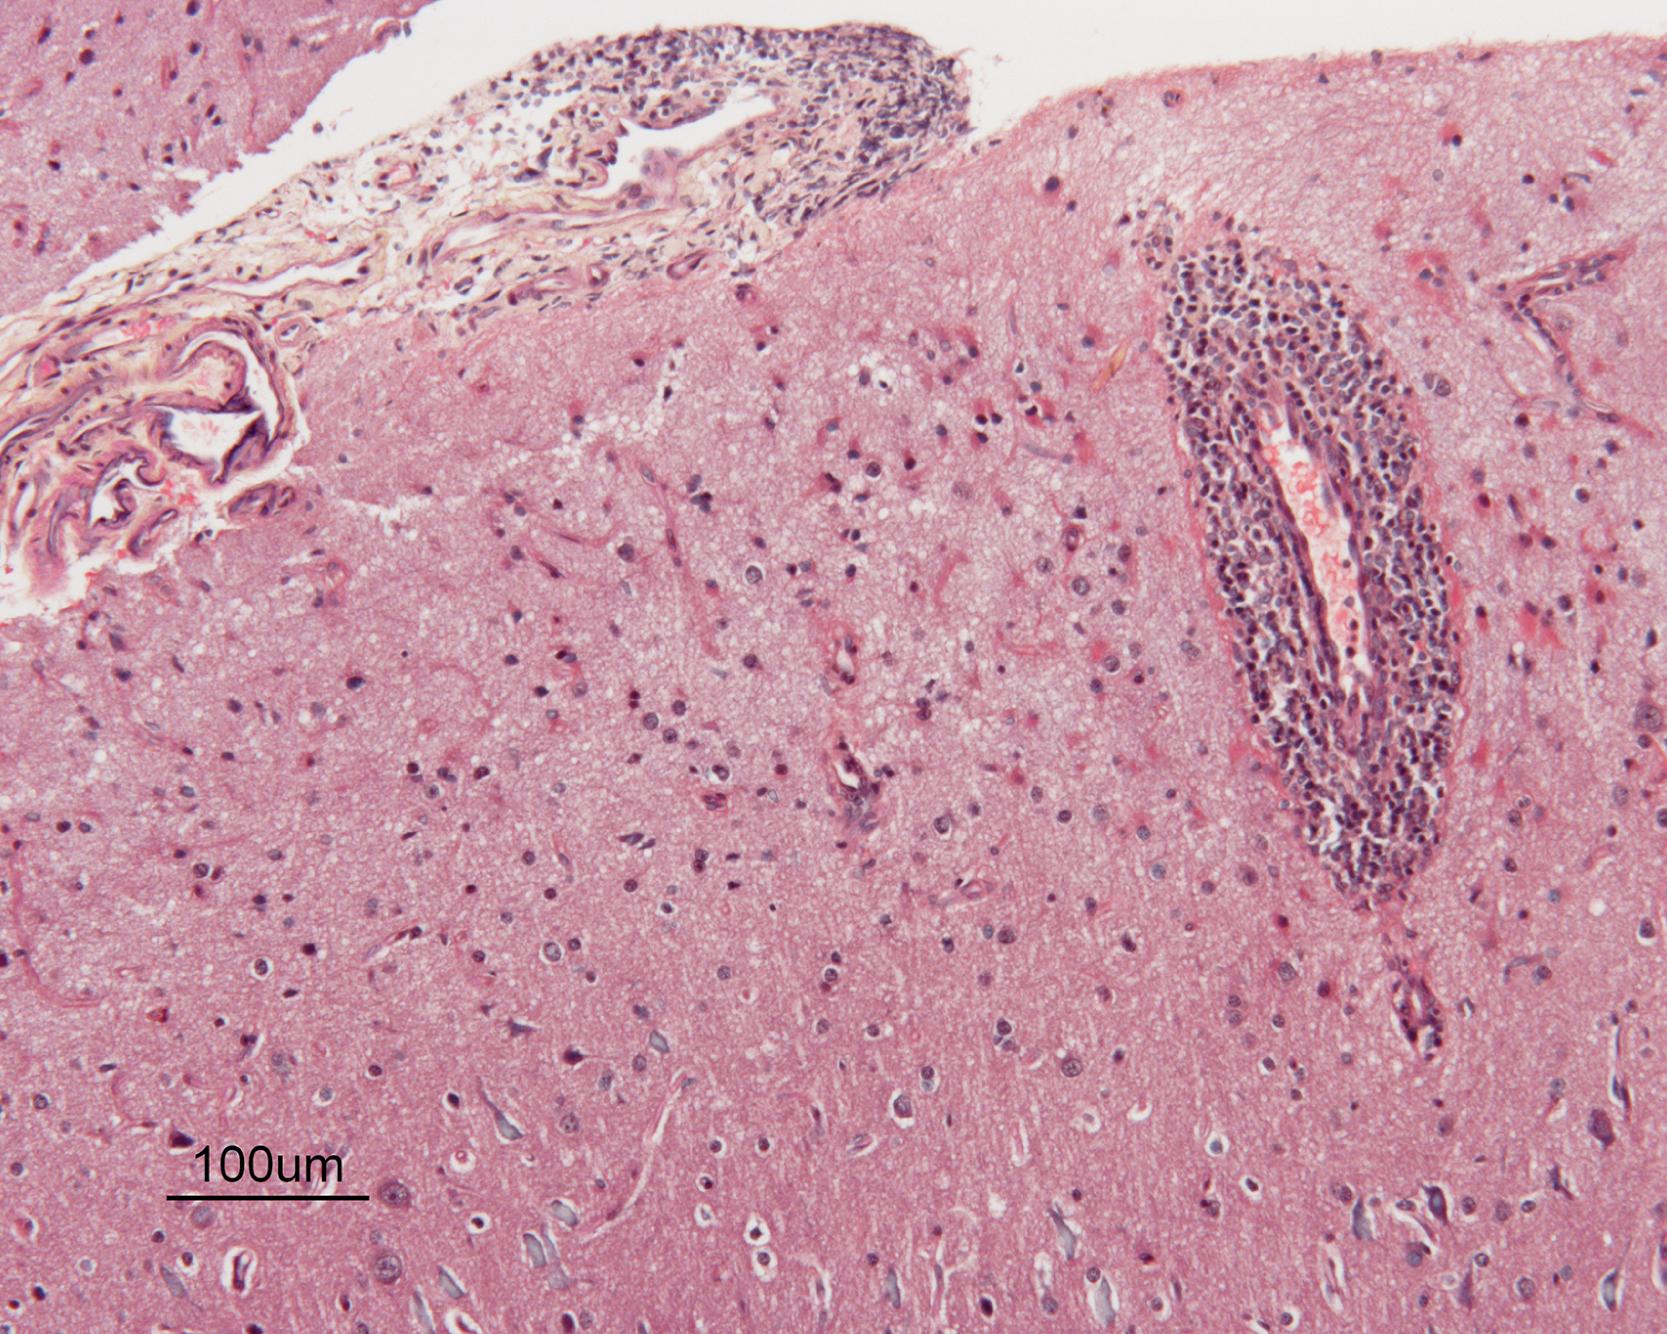 Fig. 31.2, Elective nonlesional brain biopsy in a 5-year-old child with primary small-vessel vasculitis. Masson stain demonstrates intramural and perivascular mononuclear infiltrates in small muscular arteries of the cortical gray matter and the leptomeninges (magnification ×400).